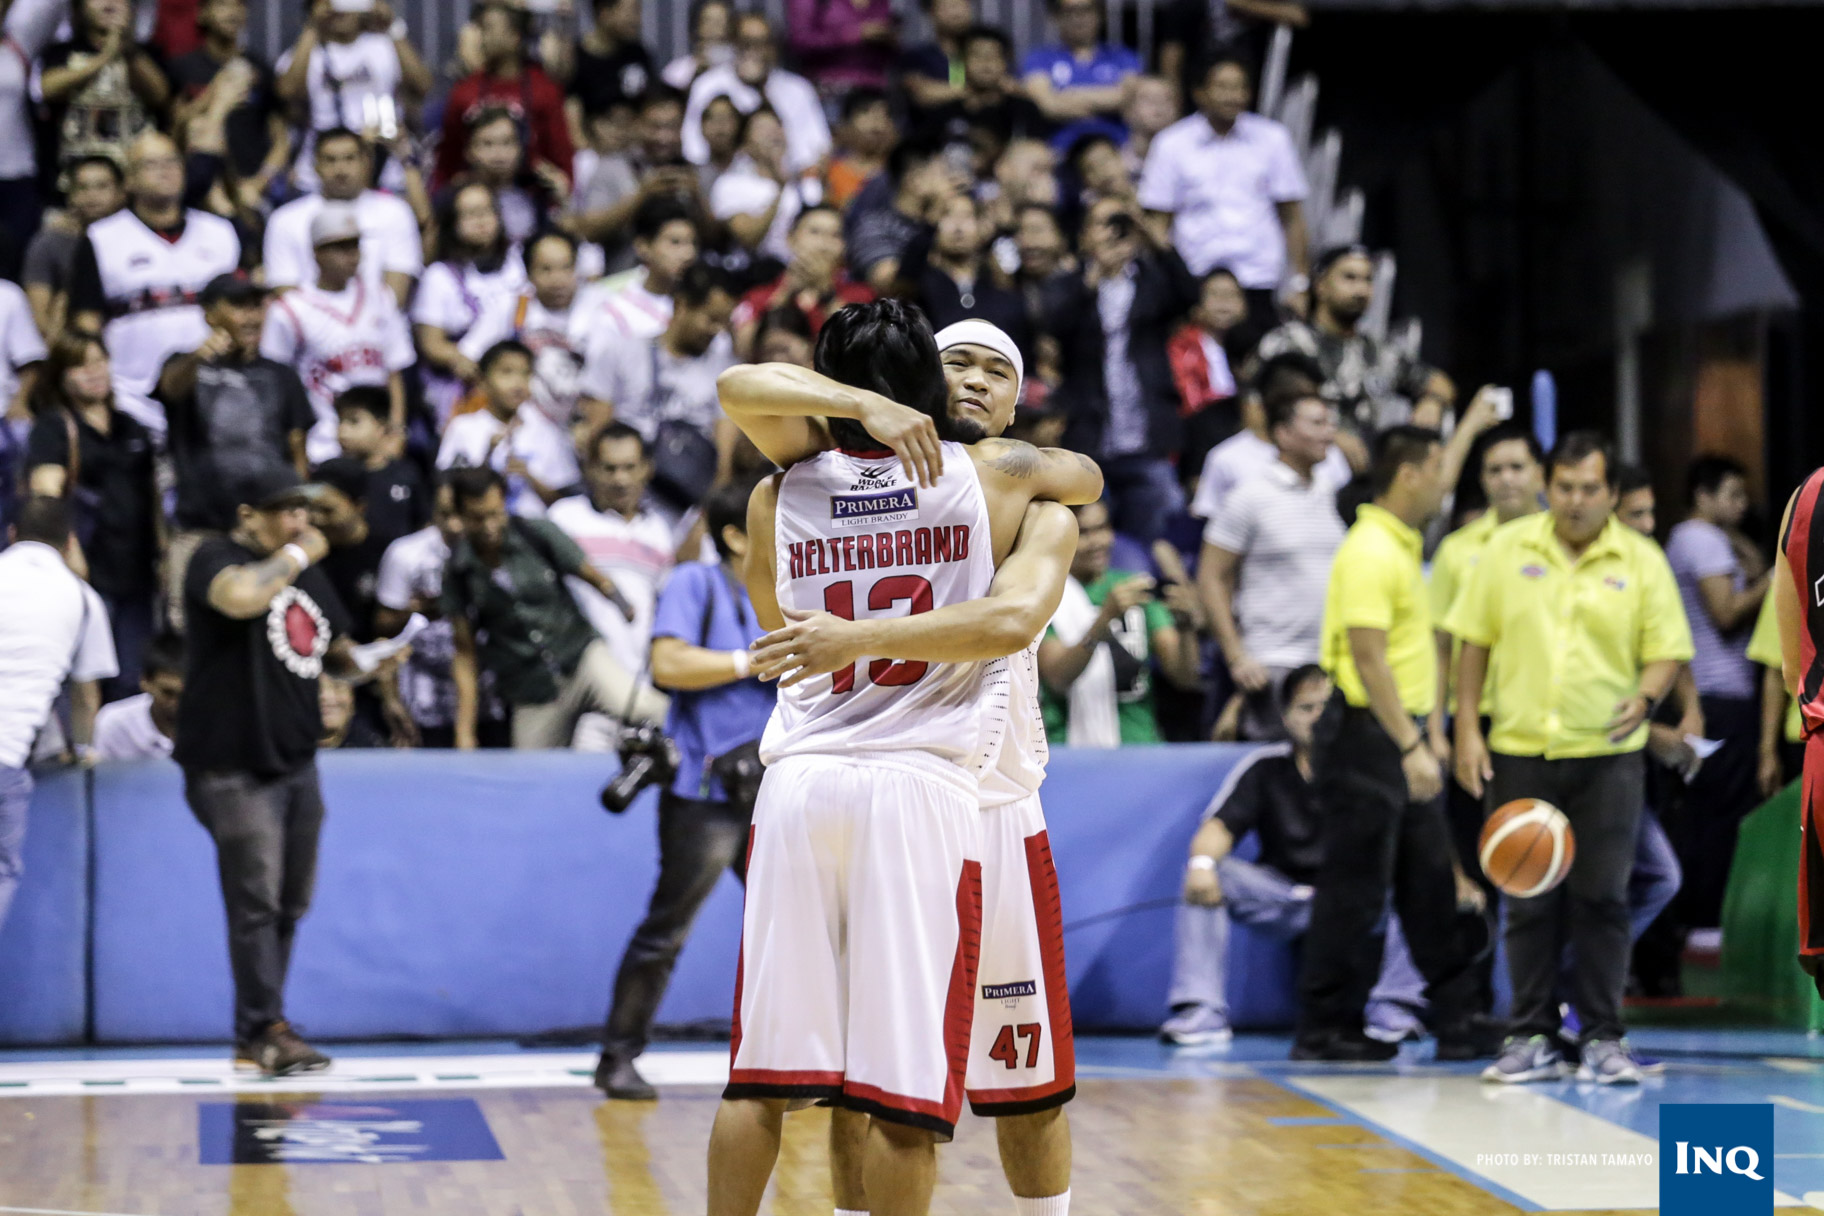 Mark Caguiao and Jayjay Helterbrand locked in a huge during the PBA Semifinals game between the Ginebra Gin Kings and San Miguel Beermen. Photo by Tristan Tamayo/INQUIRER.net